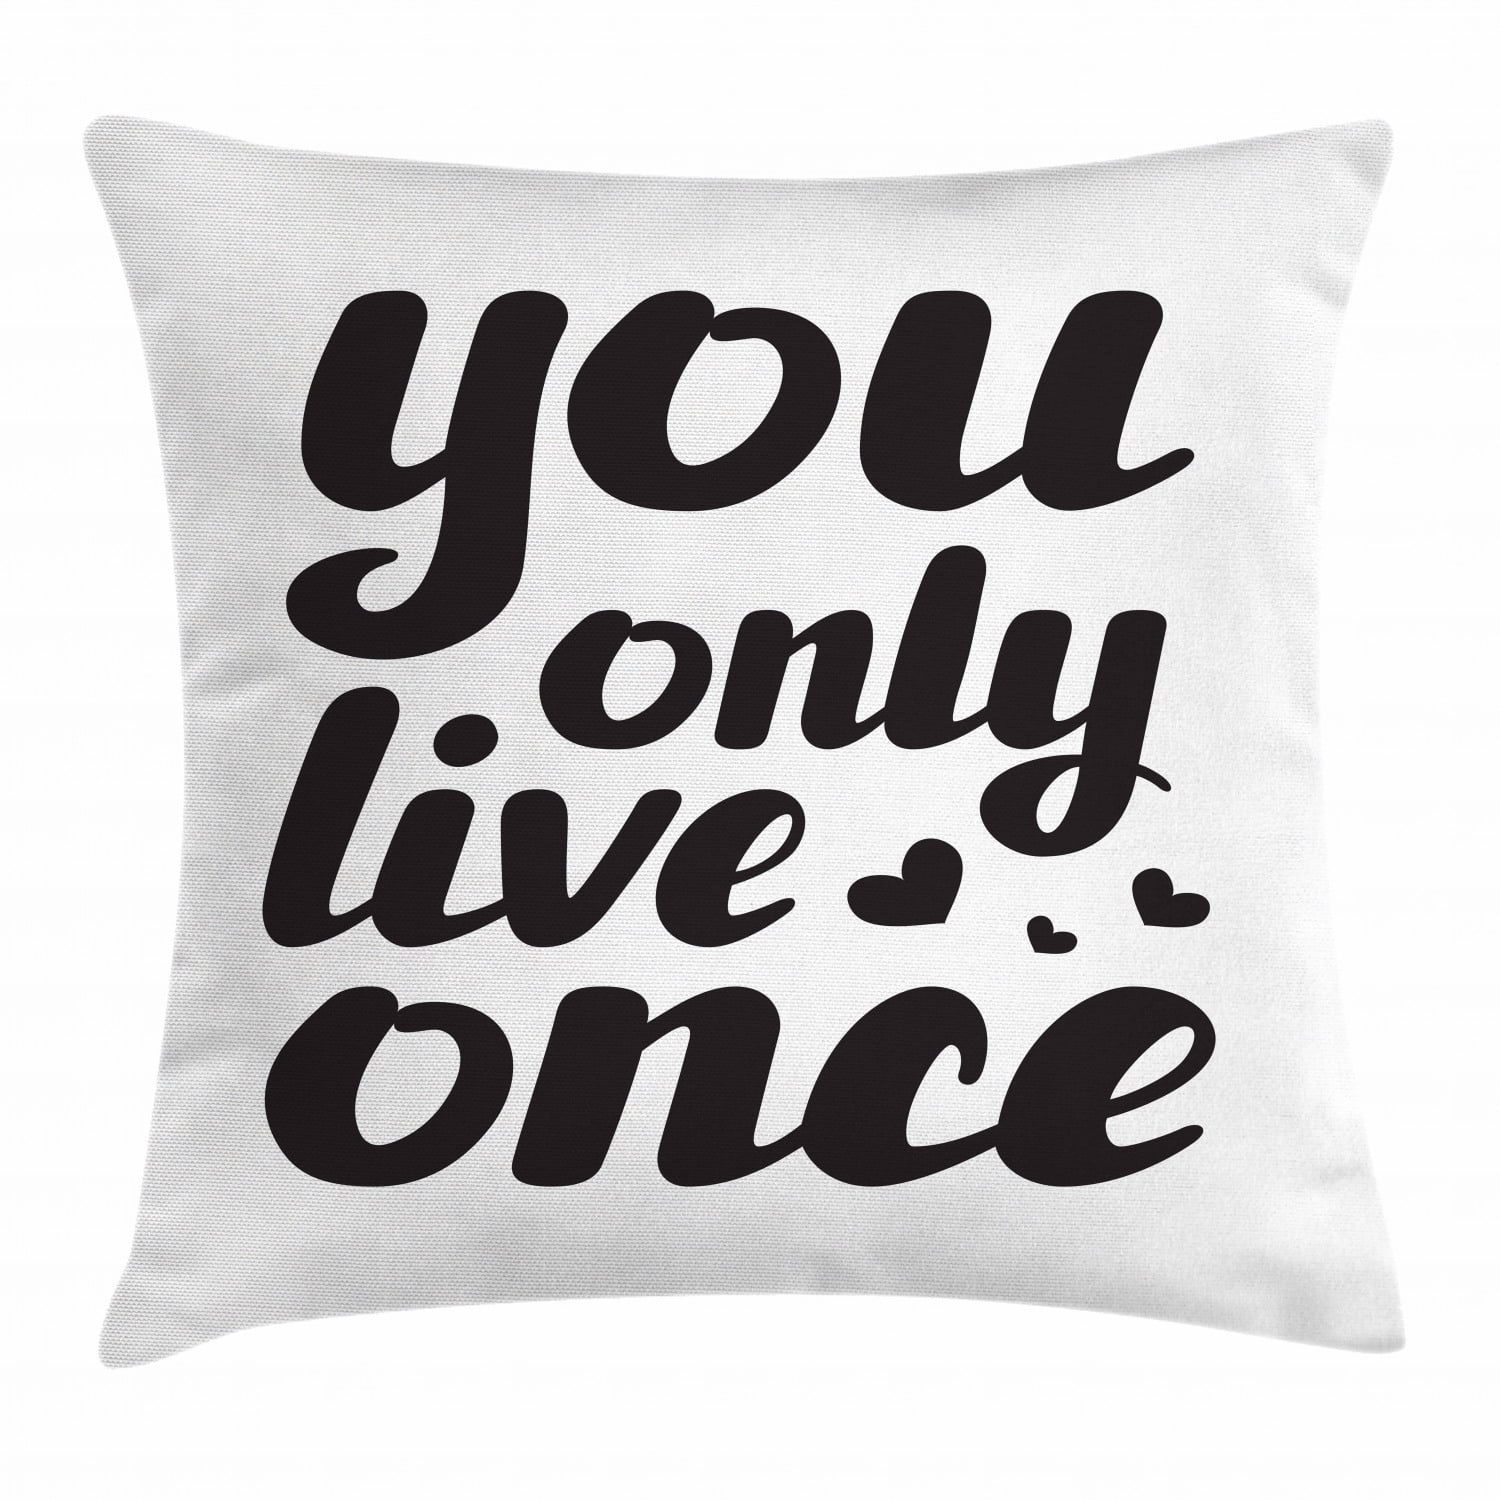 Optimistic Design with a Pink Umbrella Throw Pillow Live your dreams Live Your Dreams Enjoy your life 18x18 Play full out Multicolor